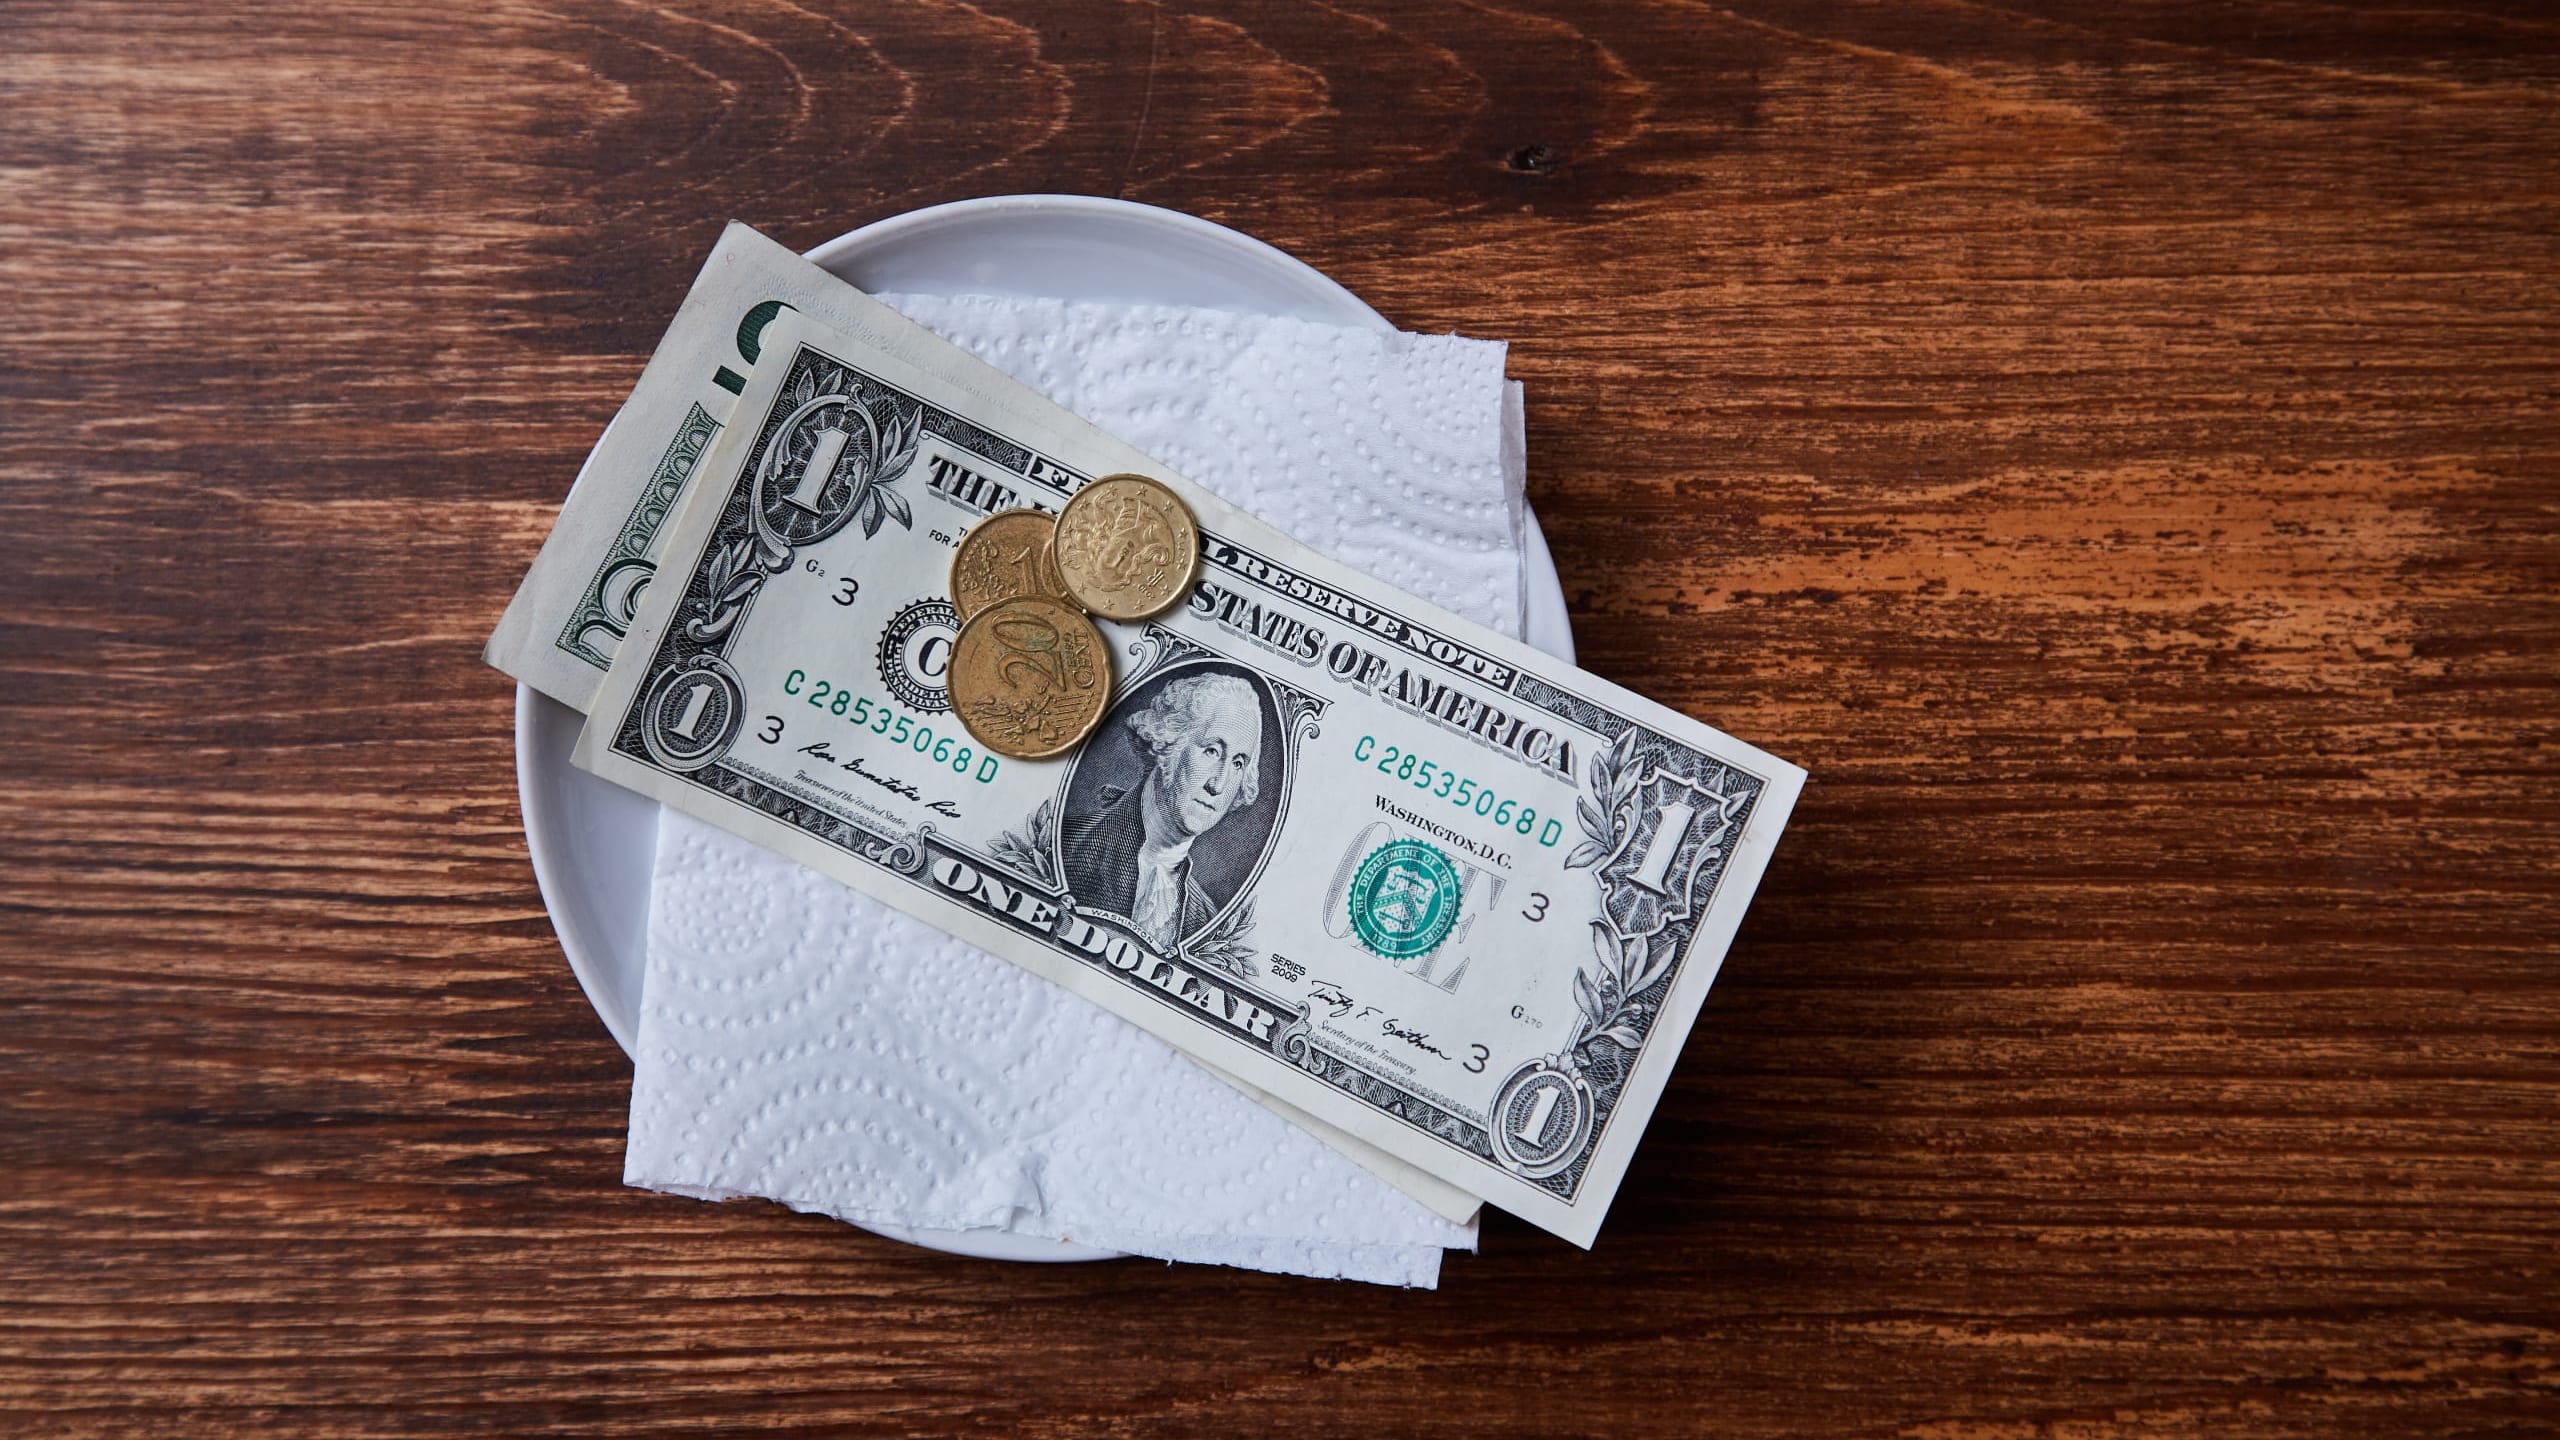 To tip or not to tip? The great gratuity debate is revived